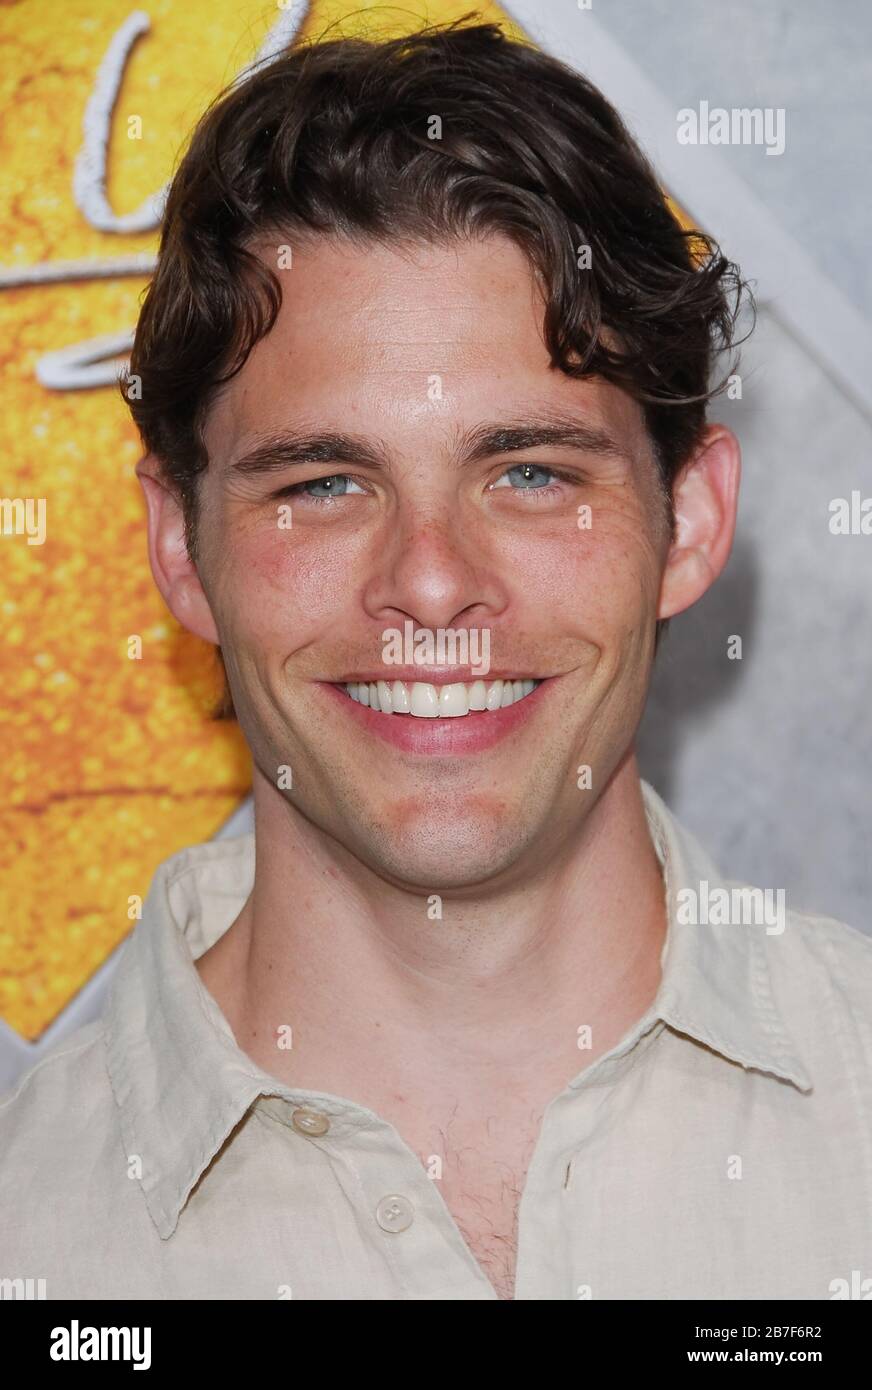 James Marsden at the World Premiere of 'Step Up' held at the Arclight Cinemas in Hollywood, CA. The event took place on Monday, August 7, 2006.  Photo by: SBM / PictureLux Stock Photo